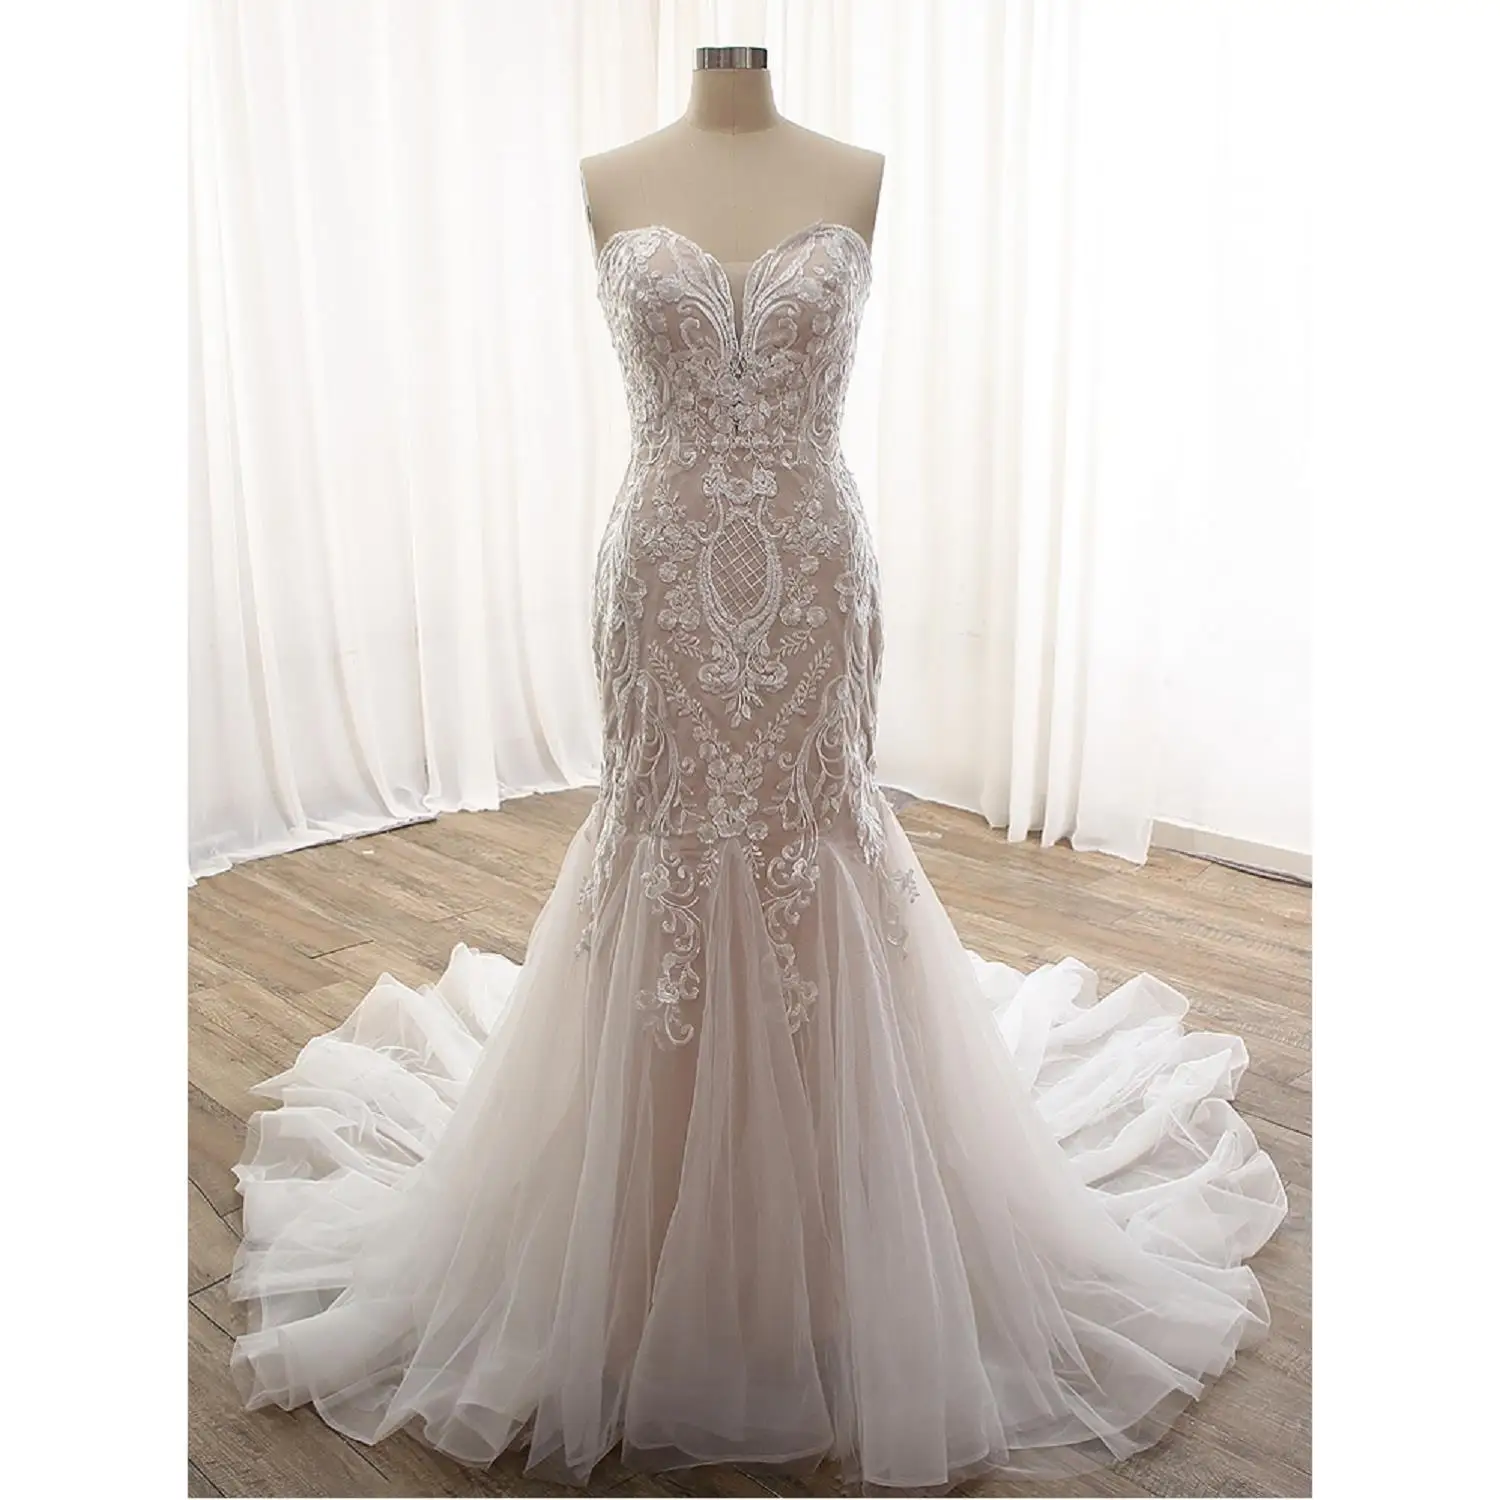 

Lace Appliques Tulle Satin Mermaid /Trumpet Wedding Dresses Chapel Train Custom Made Floor-Length Sweetheart Bridal Gowns